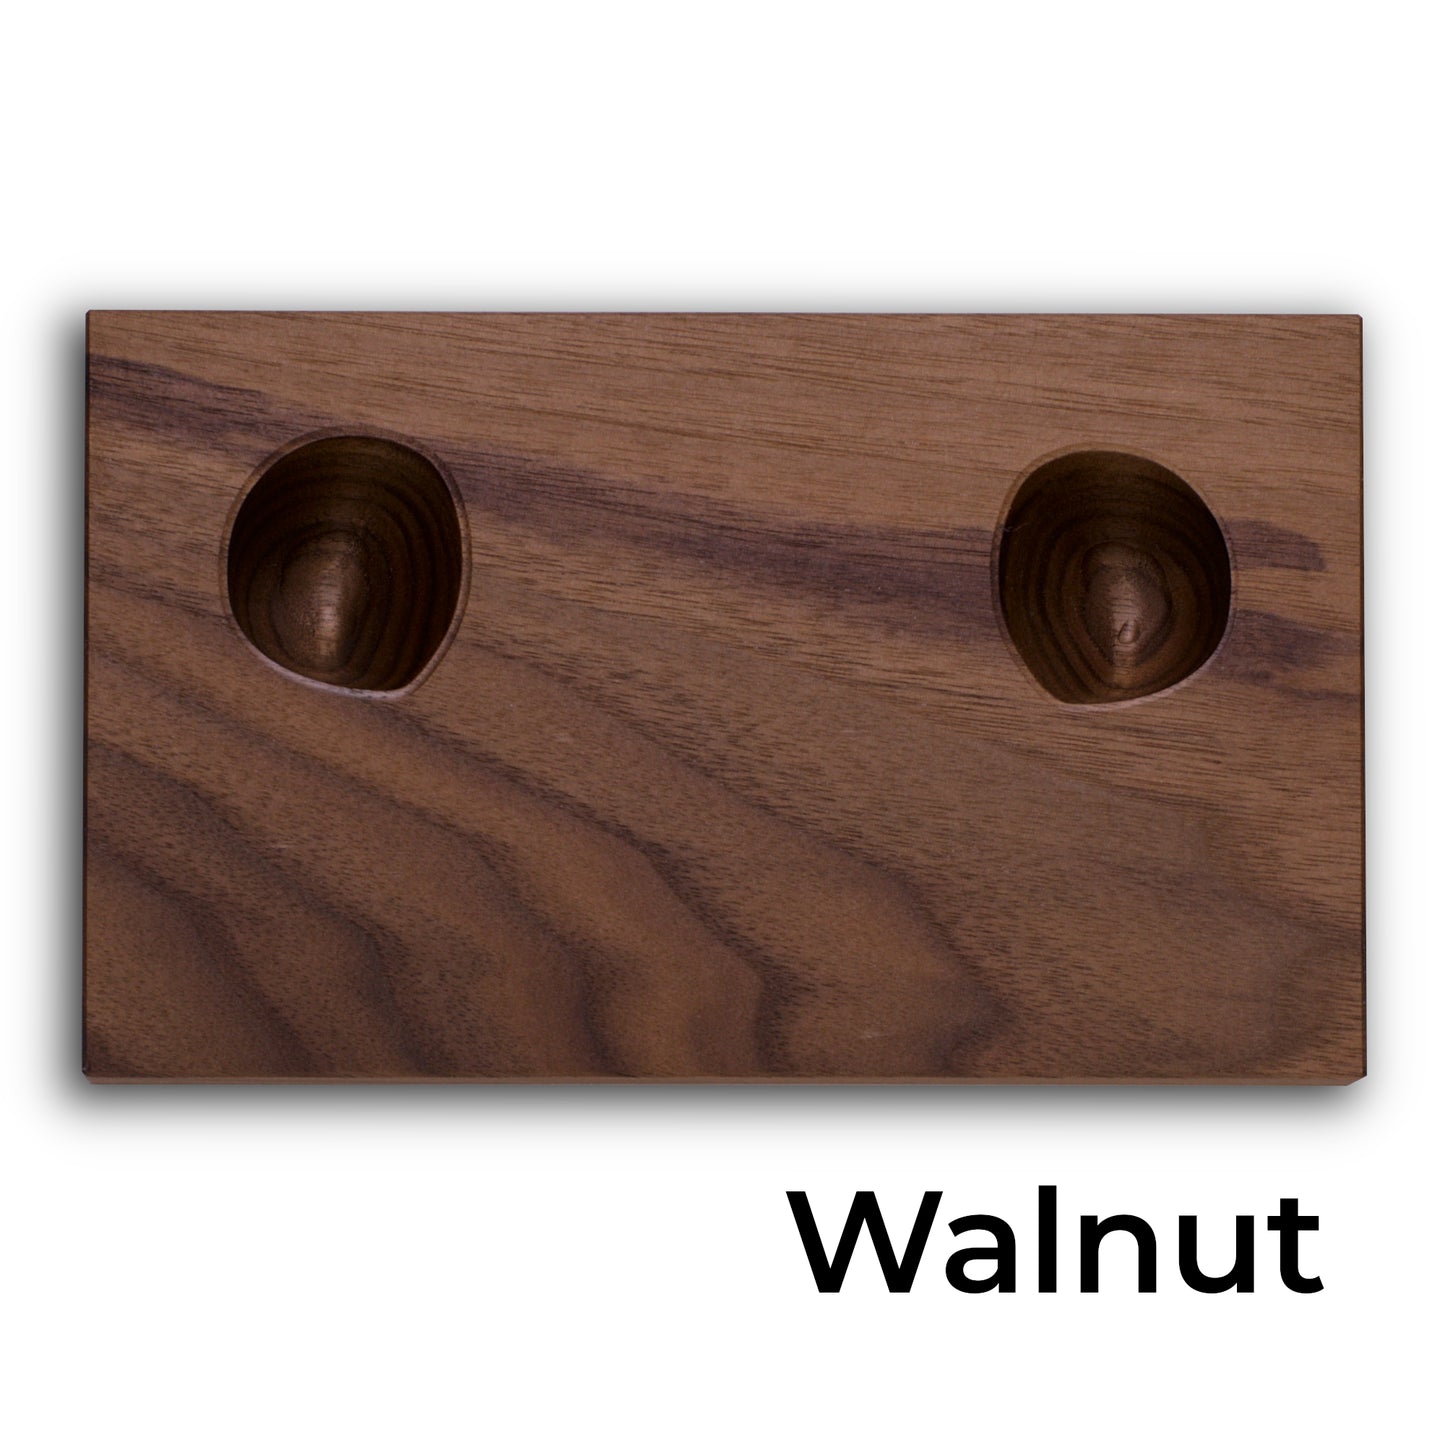 Wooden stand in Walnut for Nintendo switch pro controller